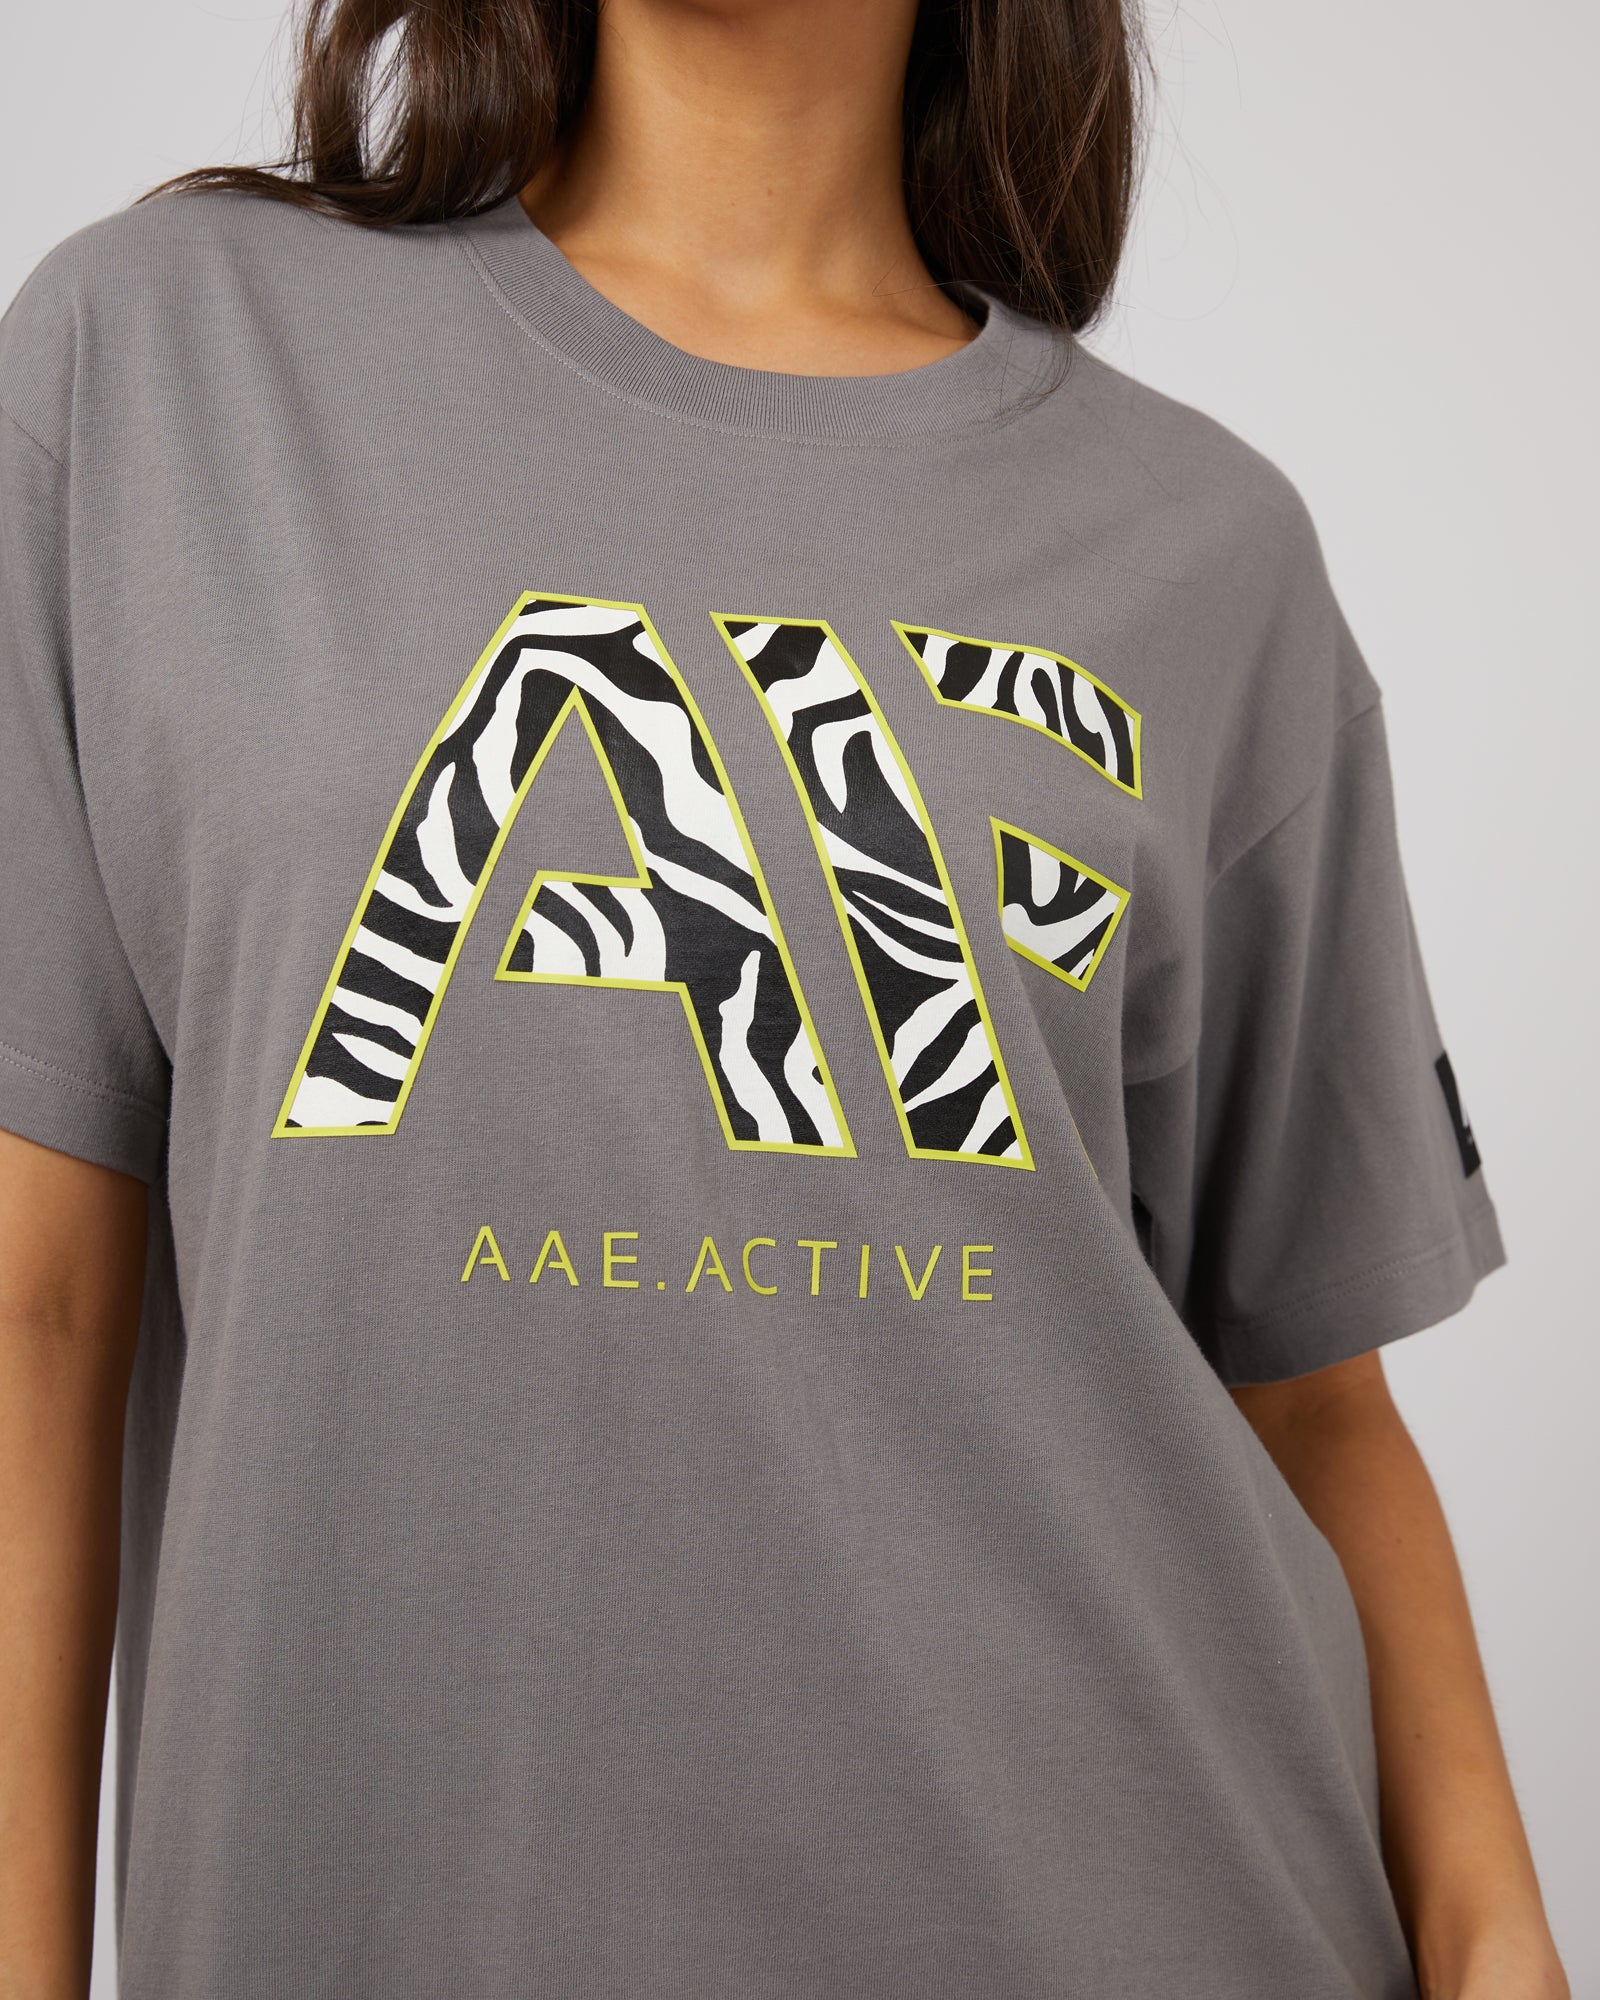 Parker Active Tee | All About Eve All About Eve